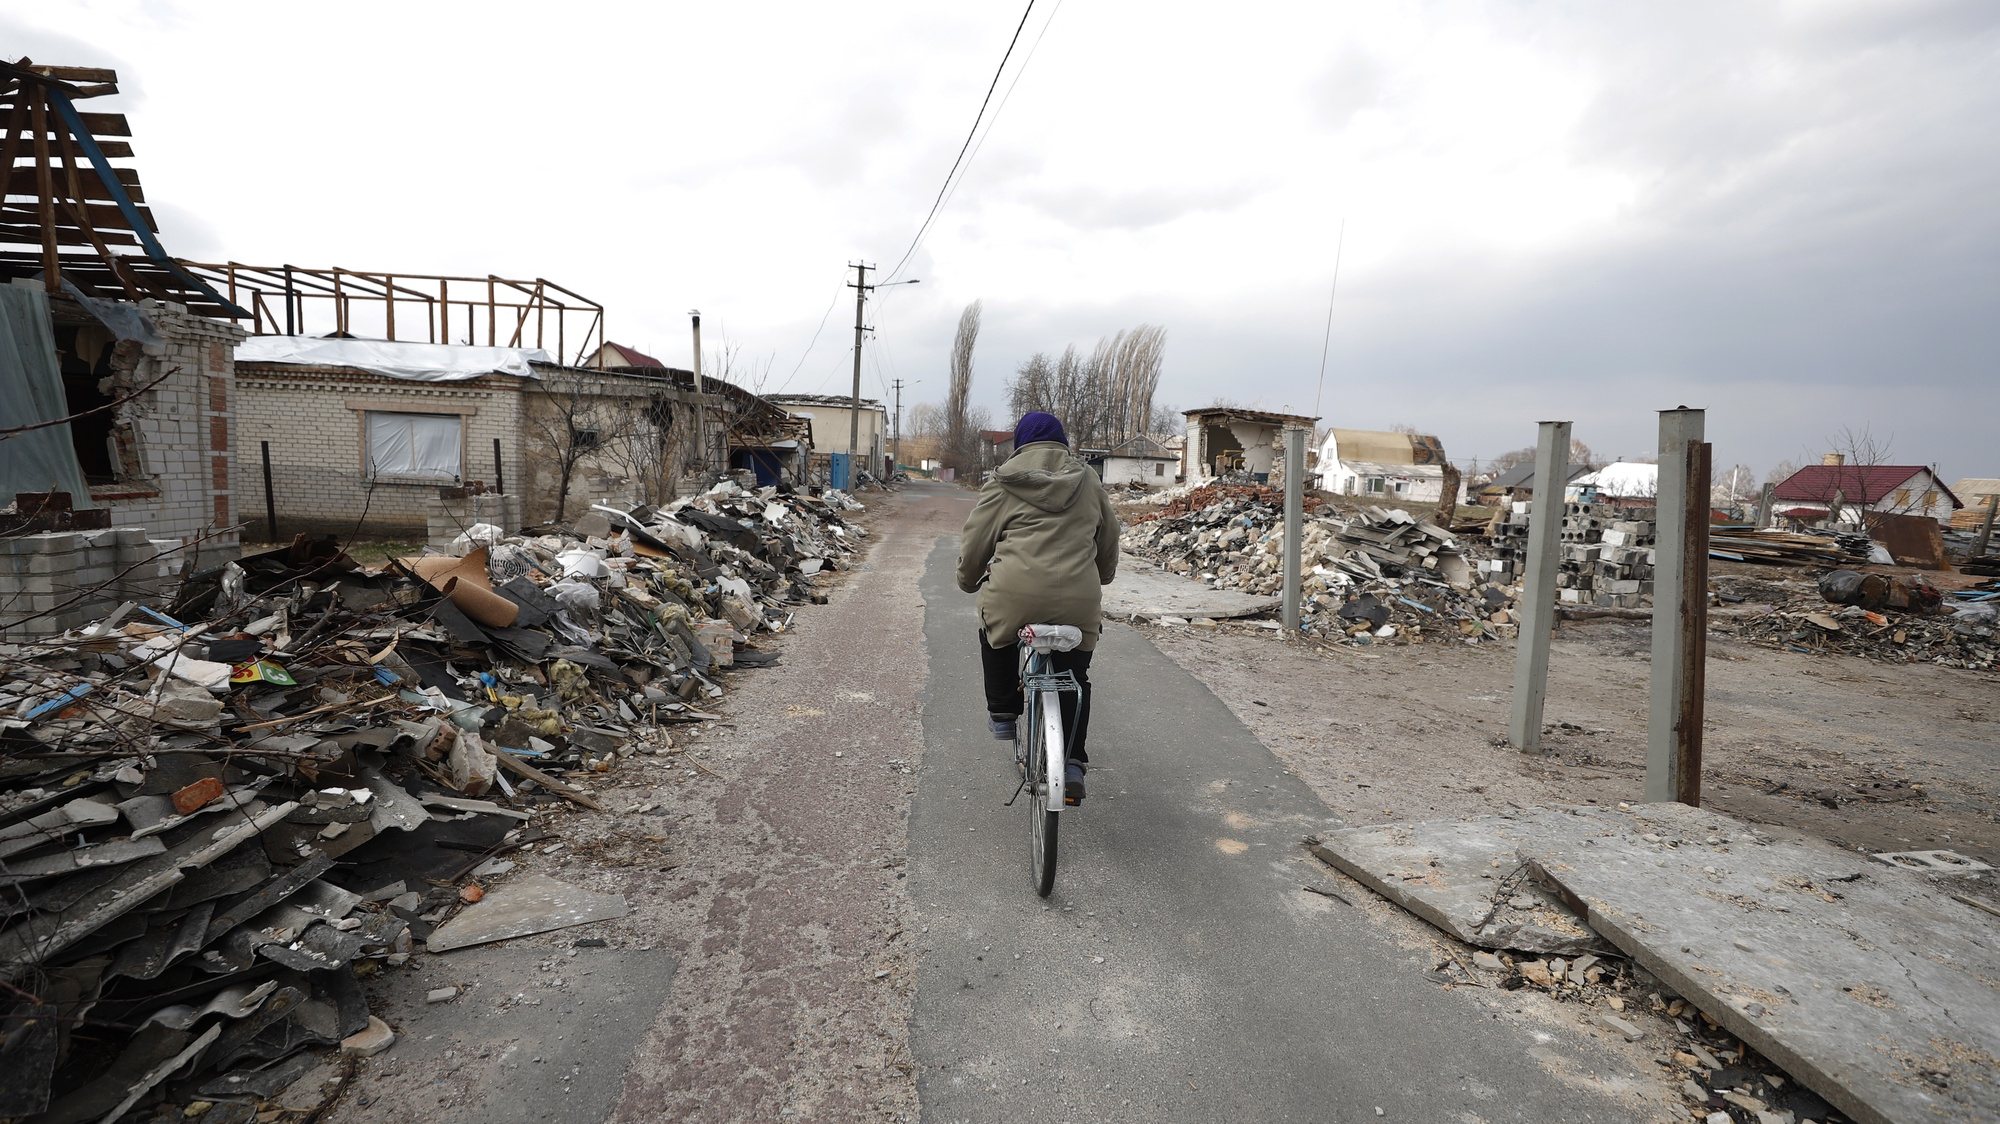 epa09857812 A woman rides a bicycle past damaged houses in the aftermath of a Russian airstrike in the village of Ulica Szkolna, Kyiv Oblast, 29 March 2022. Russian troops entered Ukraine on 24 February resulting in fighting and destruction in the country, and triggering a series of severe economic sanctions on Russia.  EPA/ATEF SAFADI